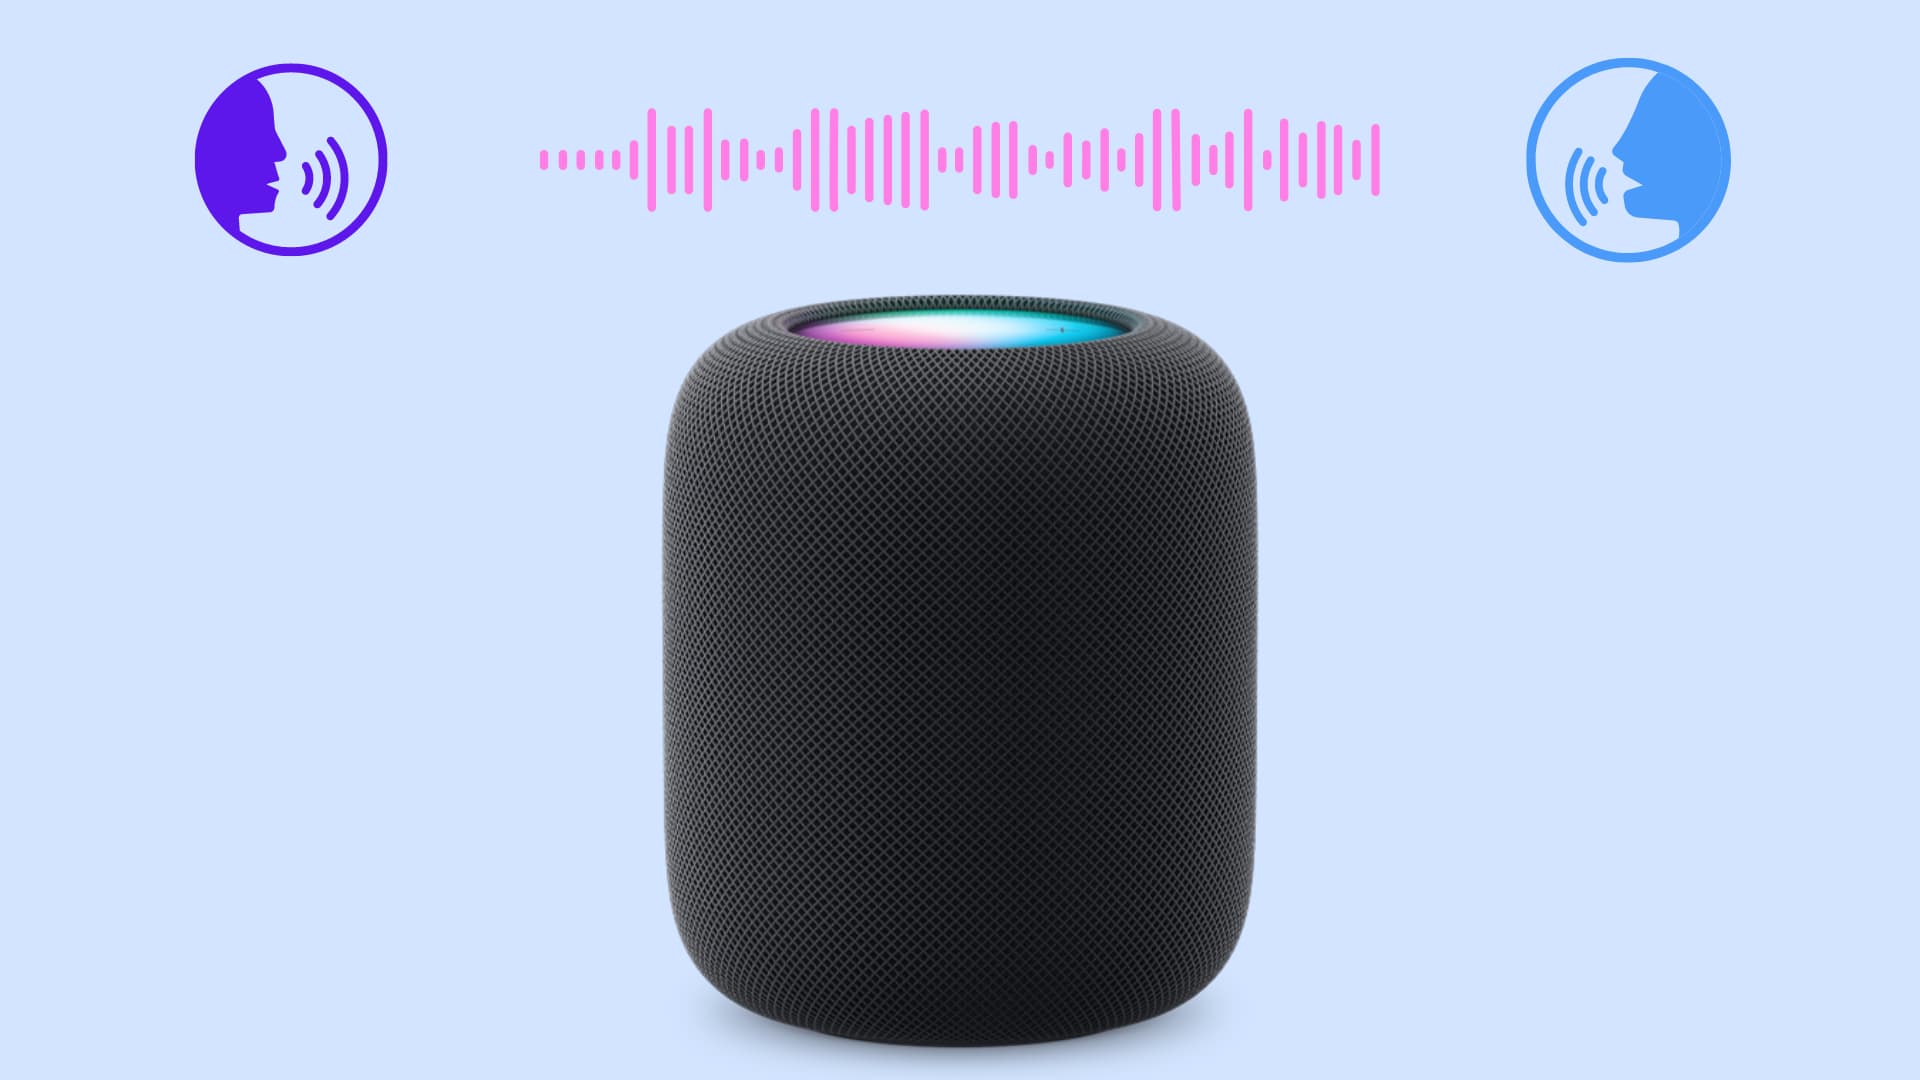 HomePod with people and sound icons to illustrate voice recognition